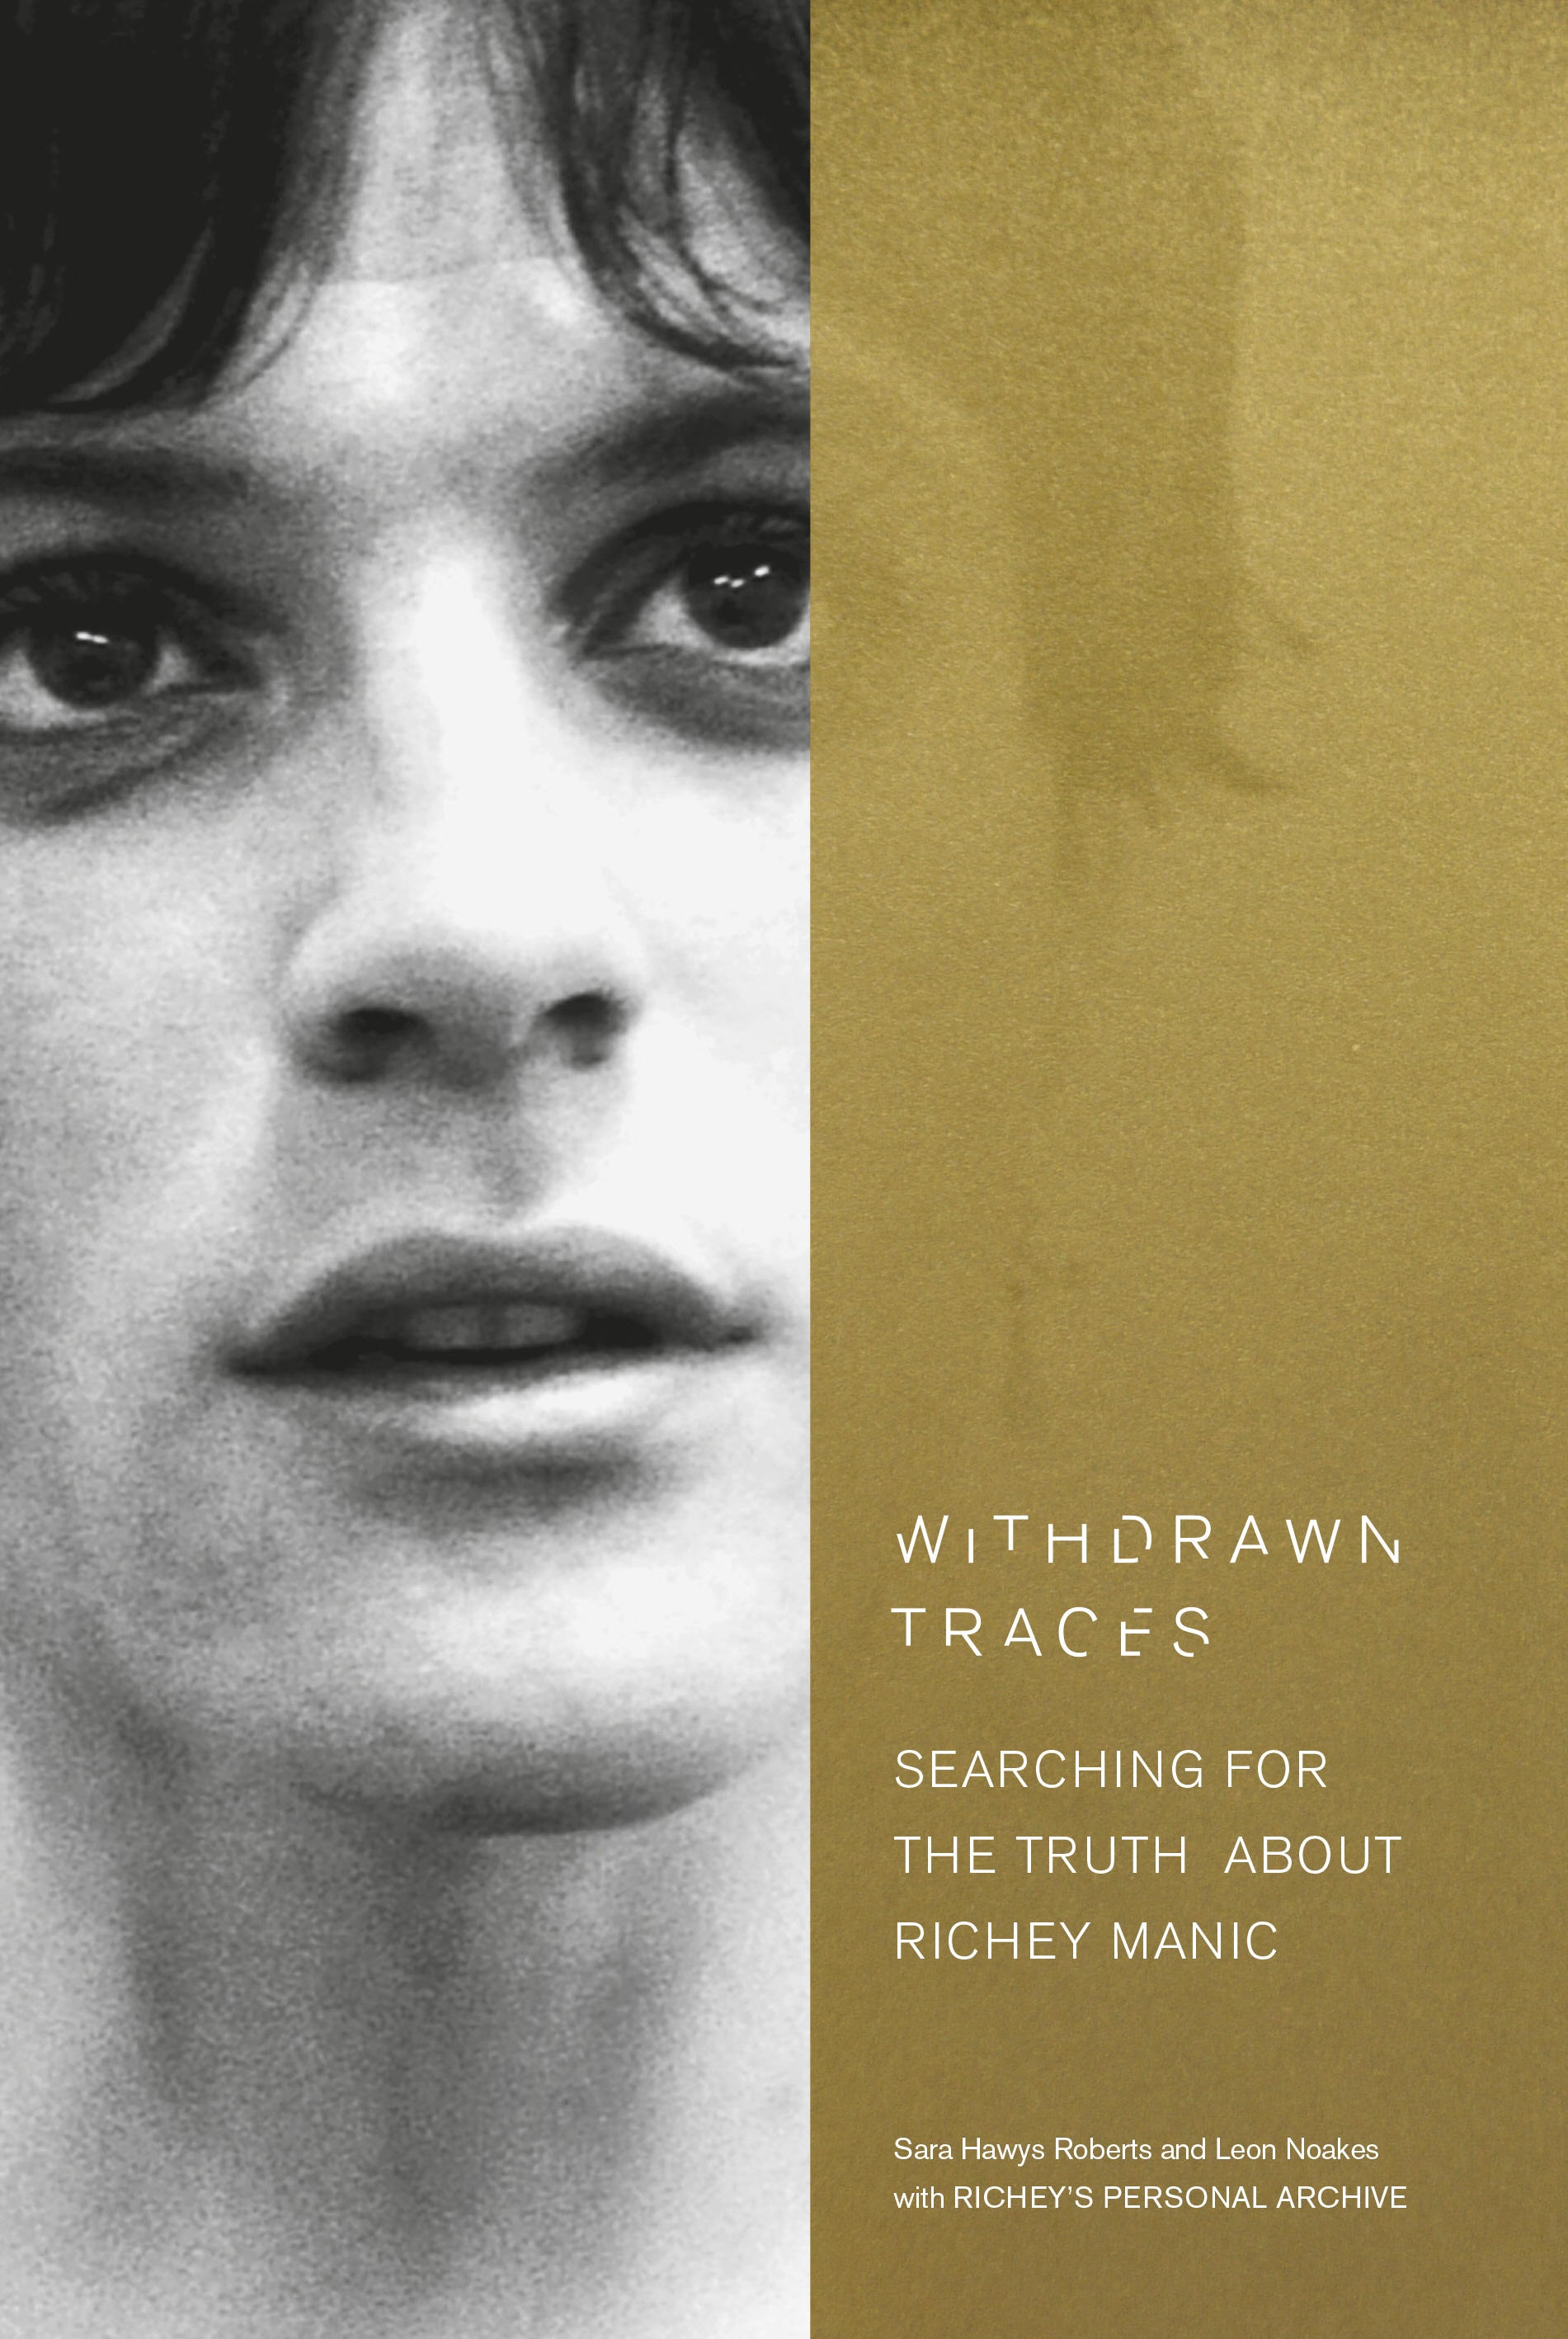 Book “Withdrawn Traces” by Sara Hawys Roberts, Leon Noakes — March 14, 2019